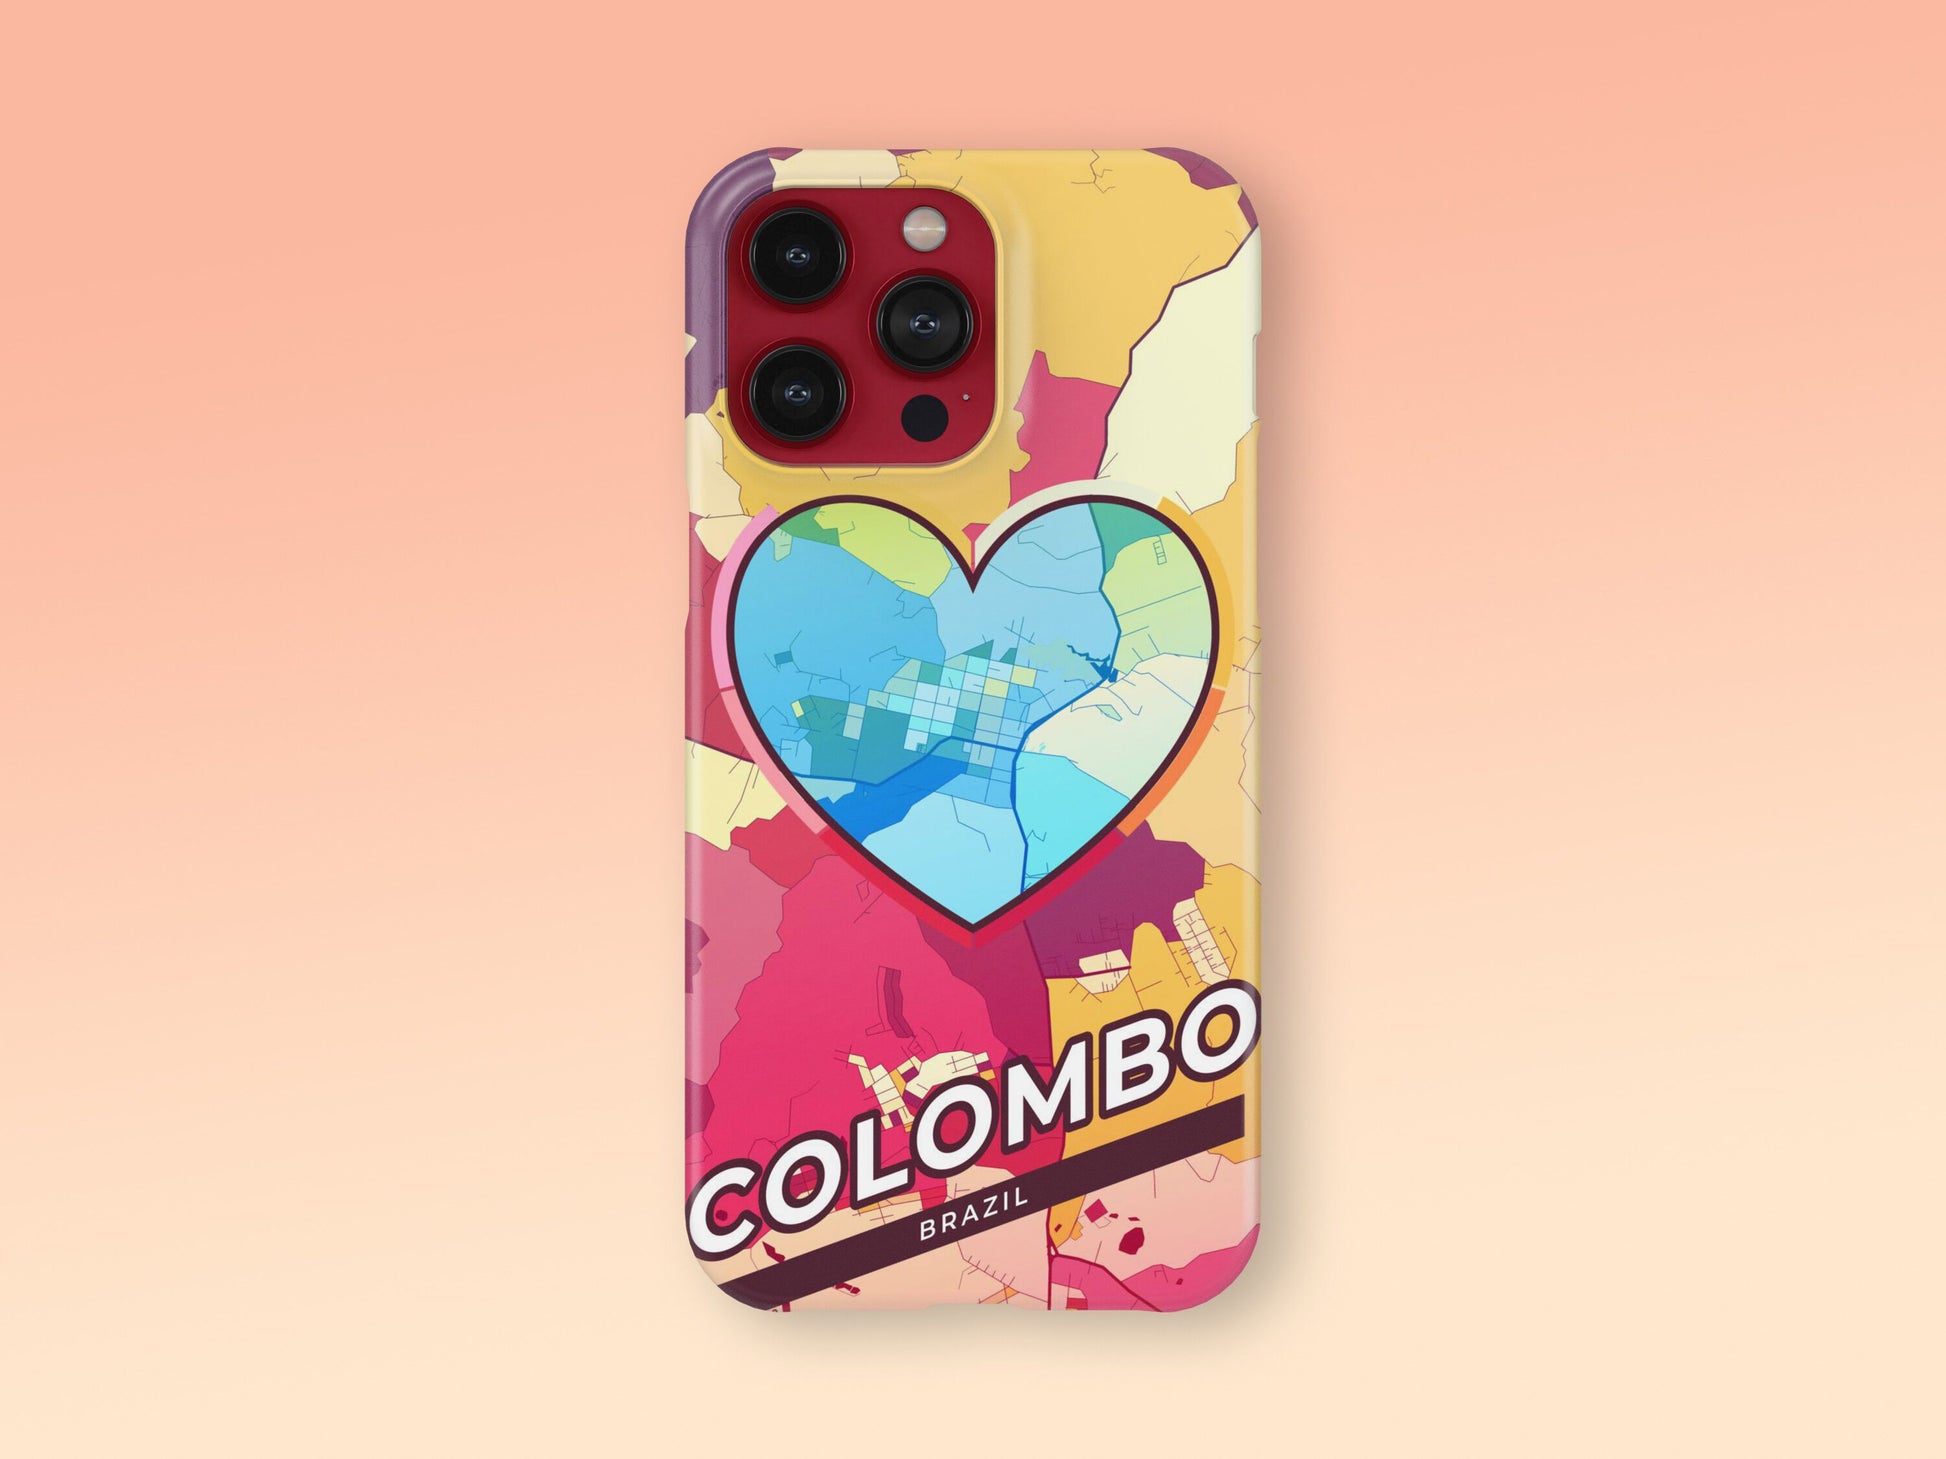 Colombo Brazil slim phone case with colorful icon. Birthday, wedding or housewarming gift. Couple match cases. 2